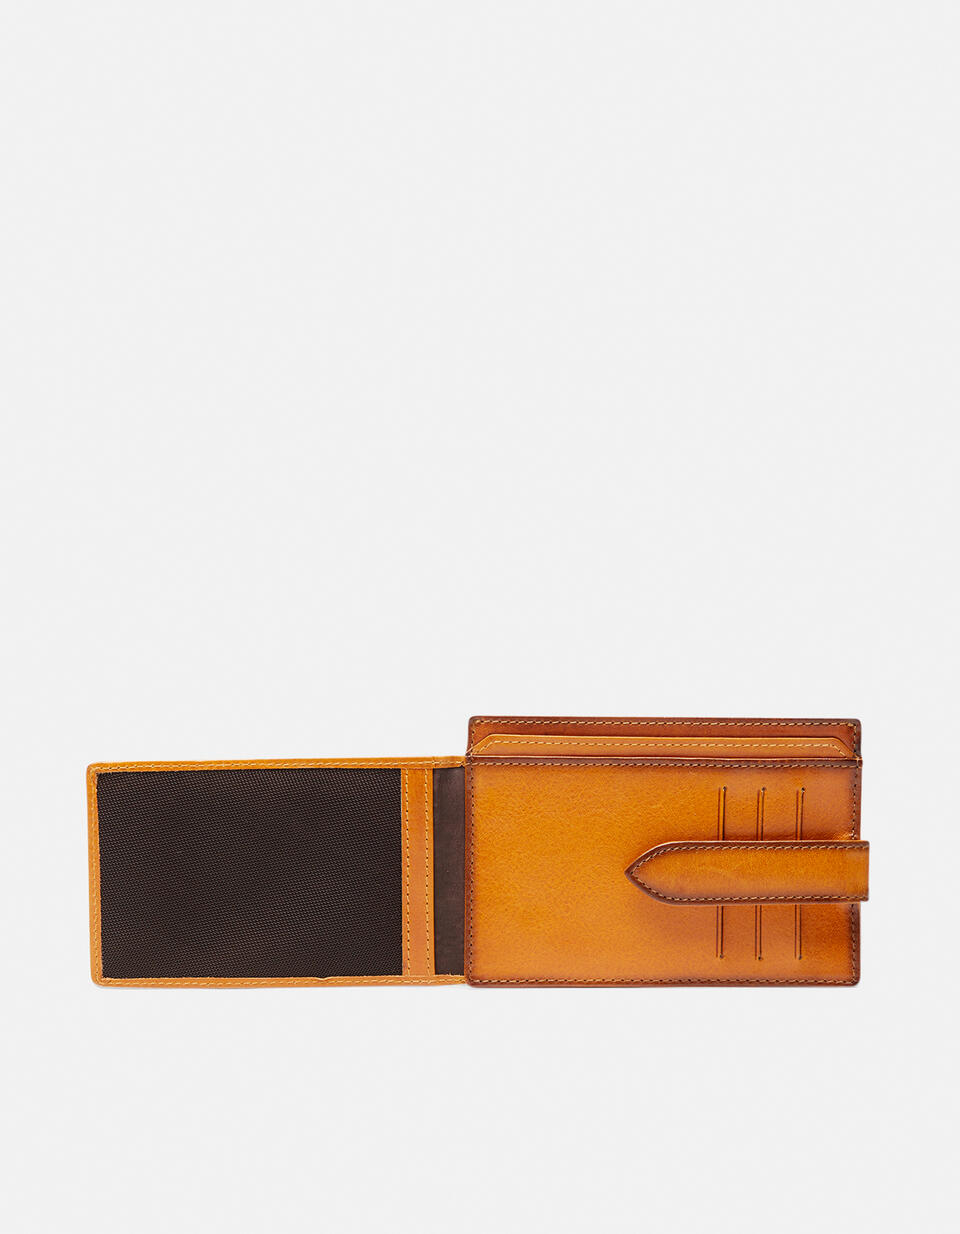 Warm and Color Anti-RFID cardholder - Women's Wallets - Men's Wallets | Wallets  - Women's Wallets - Men's Wallets | WalletsCuoieria Fiorentina